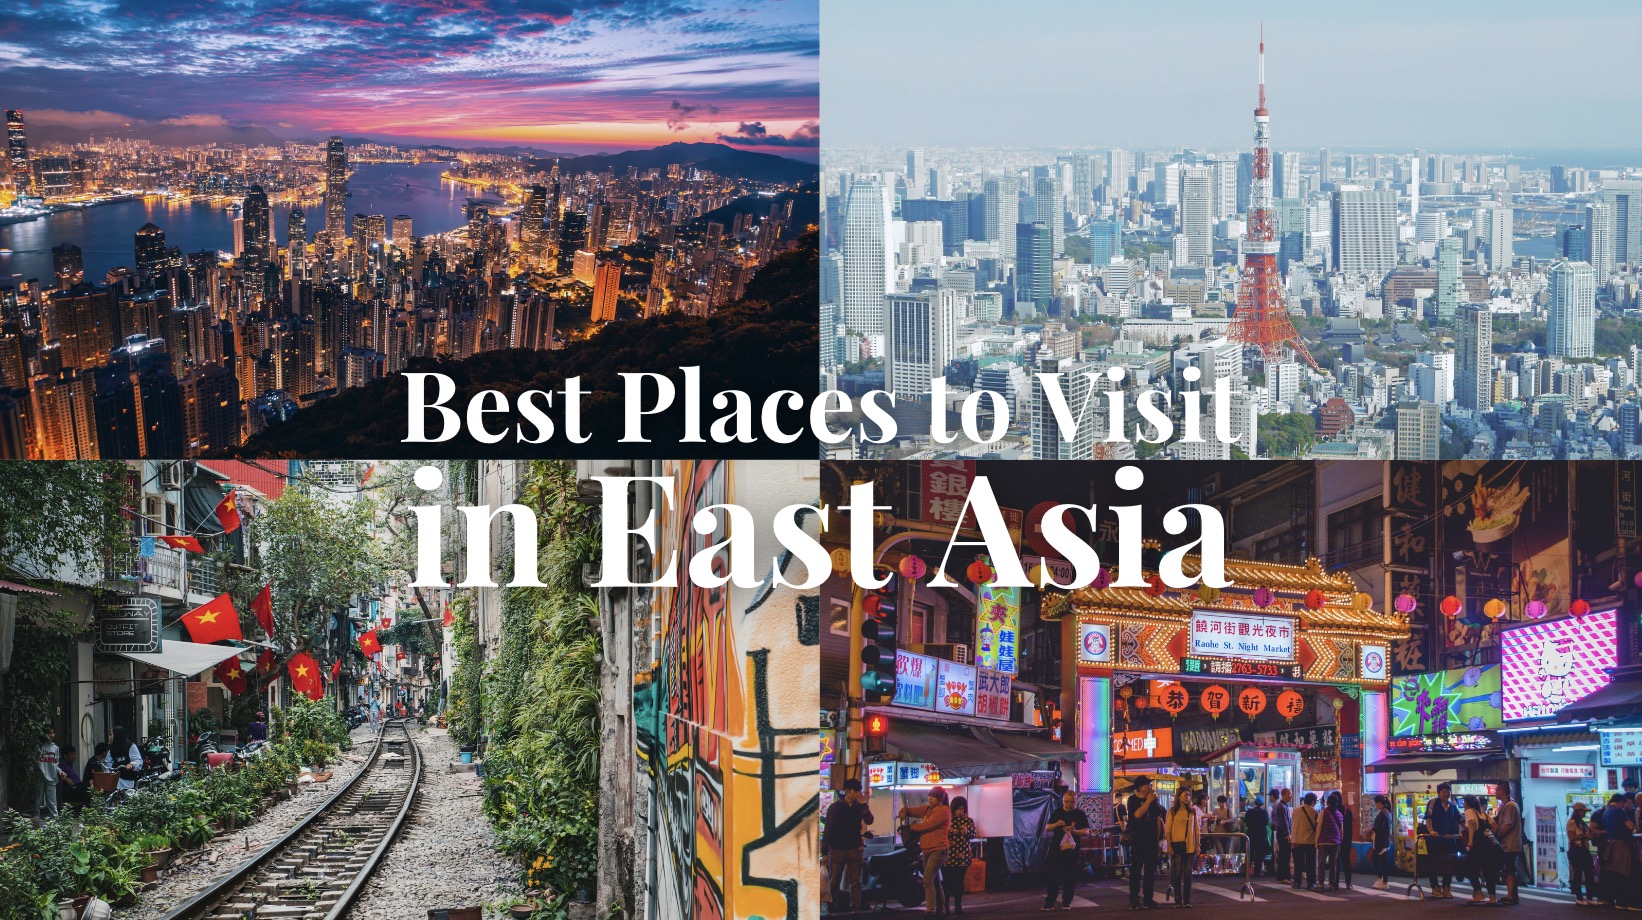 Best Places to Visit in East Asia